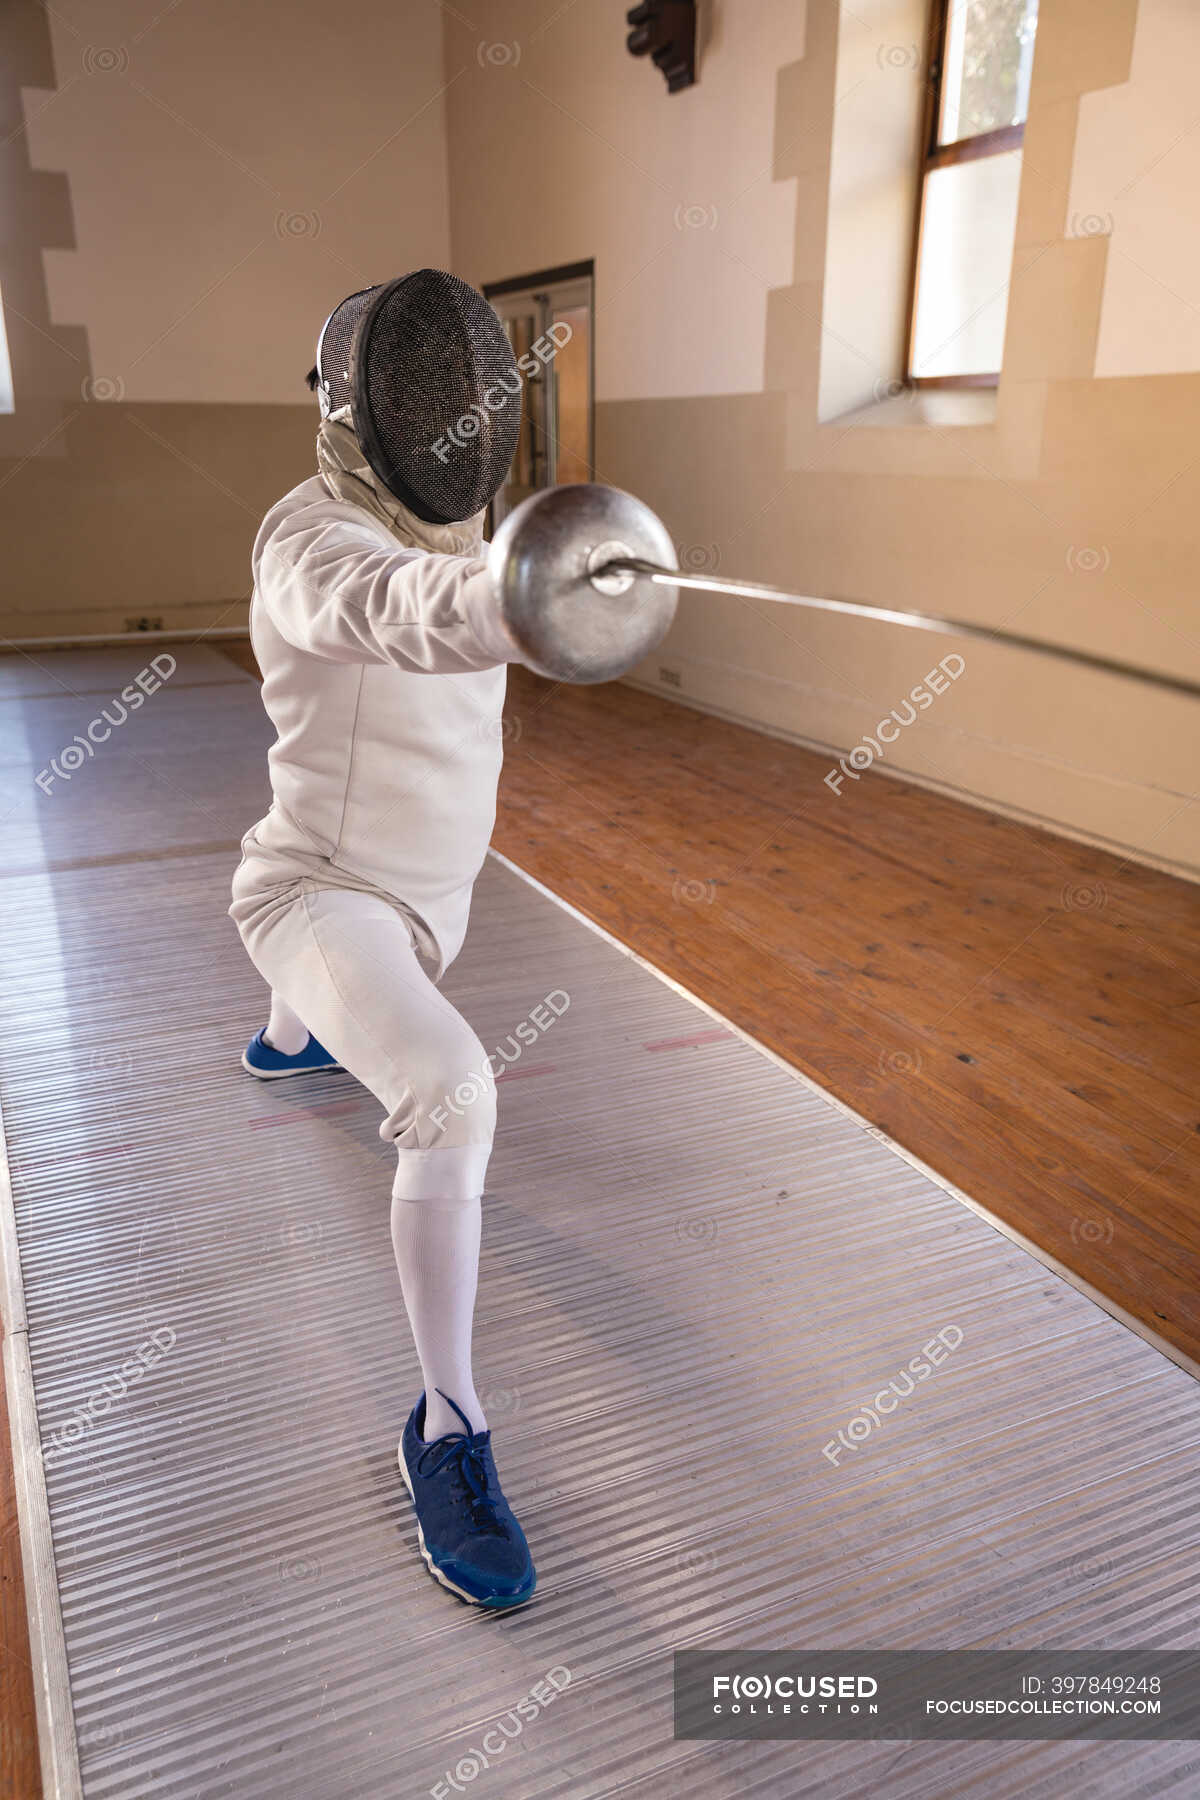 Caucasian sportsman wearing protective fencing outfit during a fencing  training session, preparing for a duel, holding an epee and lunging.  Fencers training at a gym. — power, glove - Stock Photo | #397849248